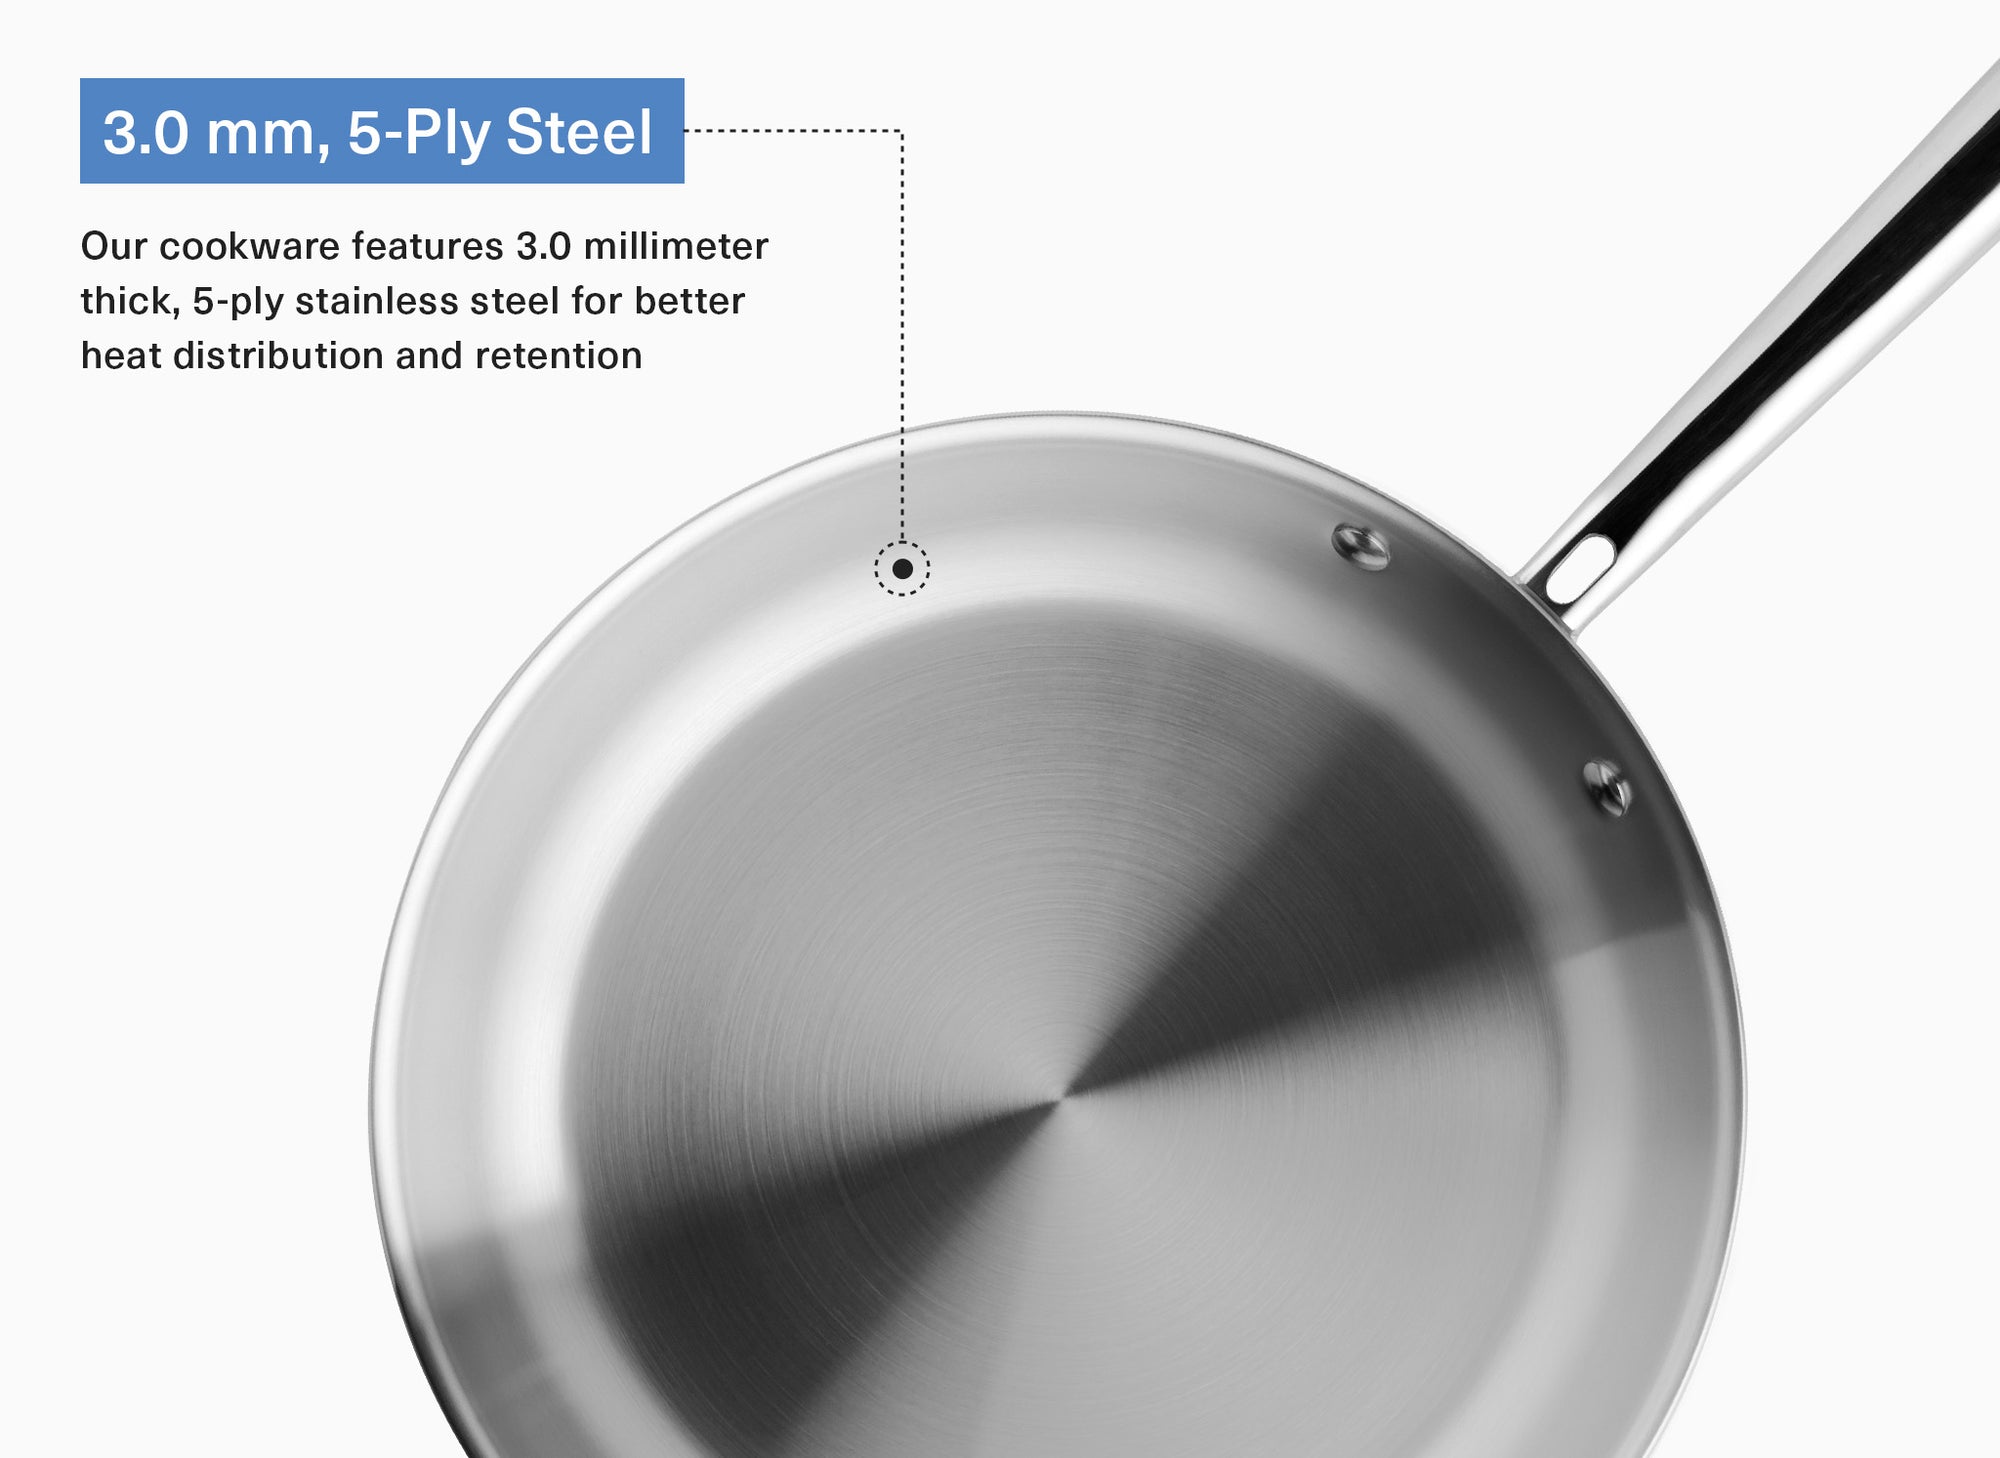 A diagram of the Misen Stainless Steel Pan’s 3mm, 5-Ply Steel for better heat distribution and retention.